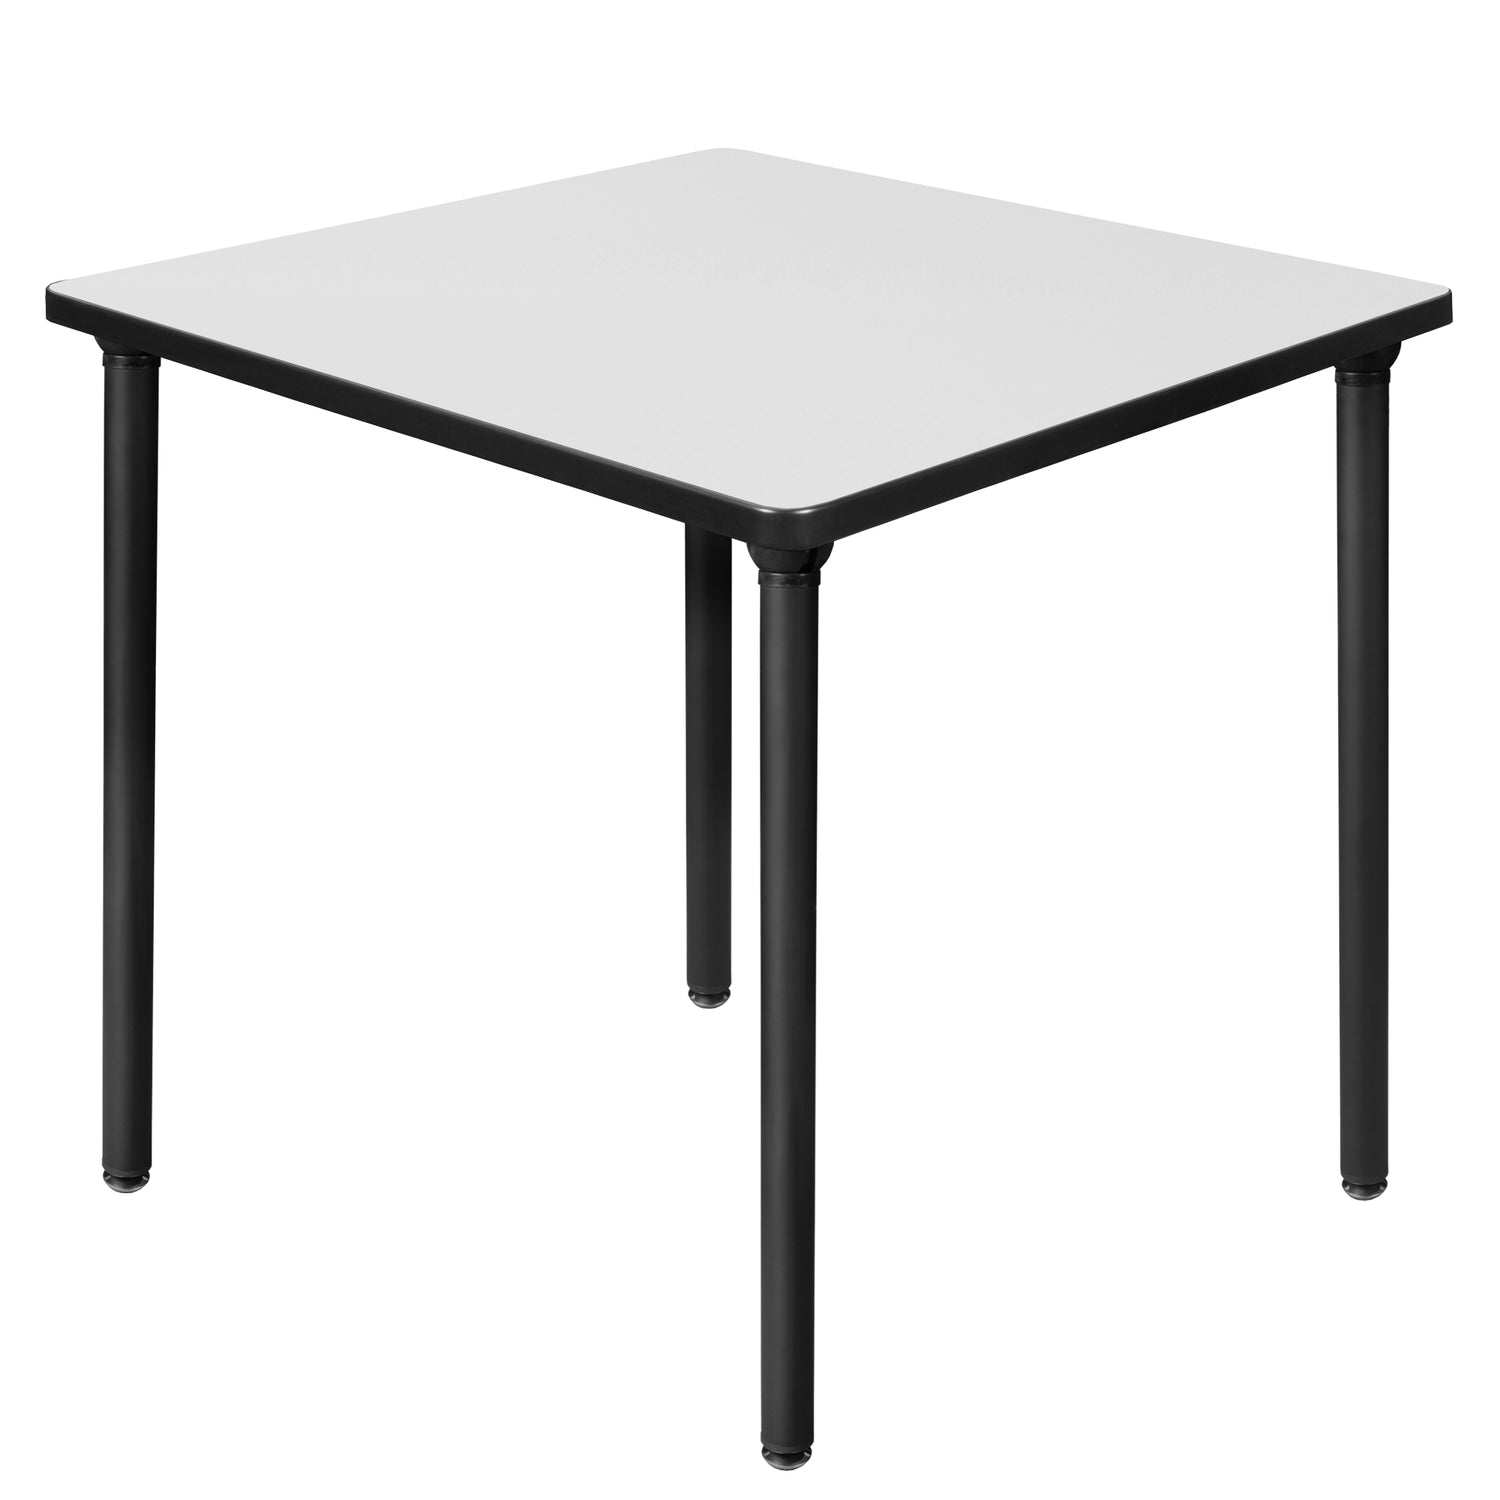 Kee 30" Square Folding Breakroom Table